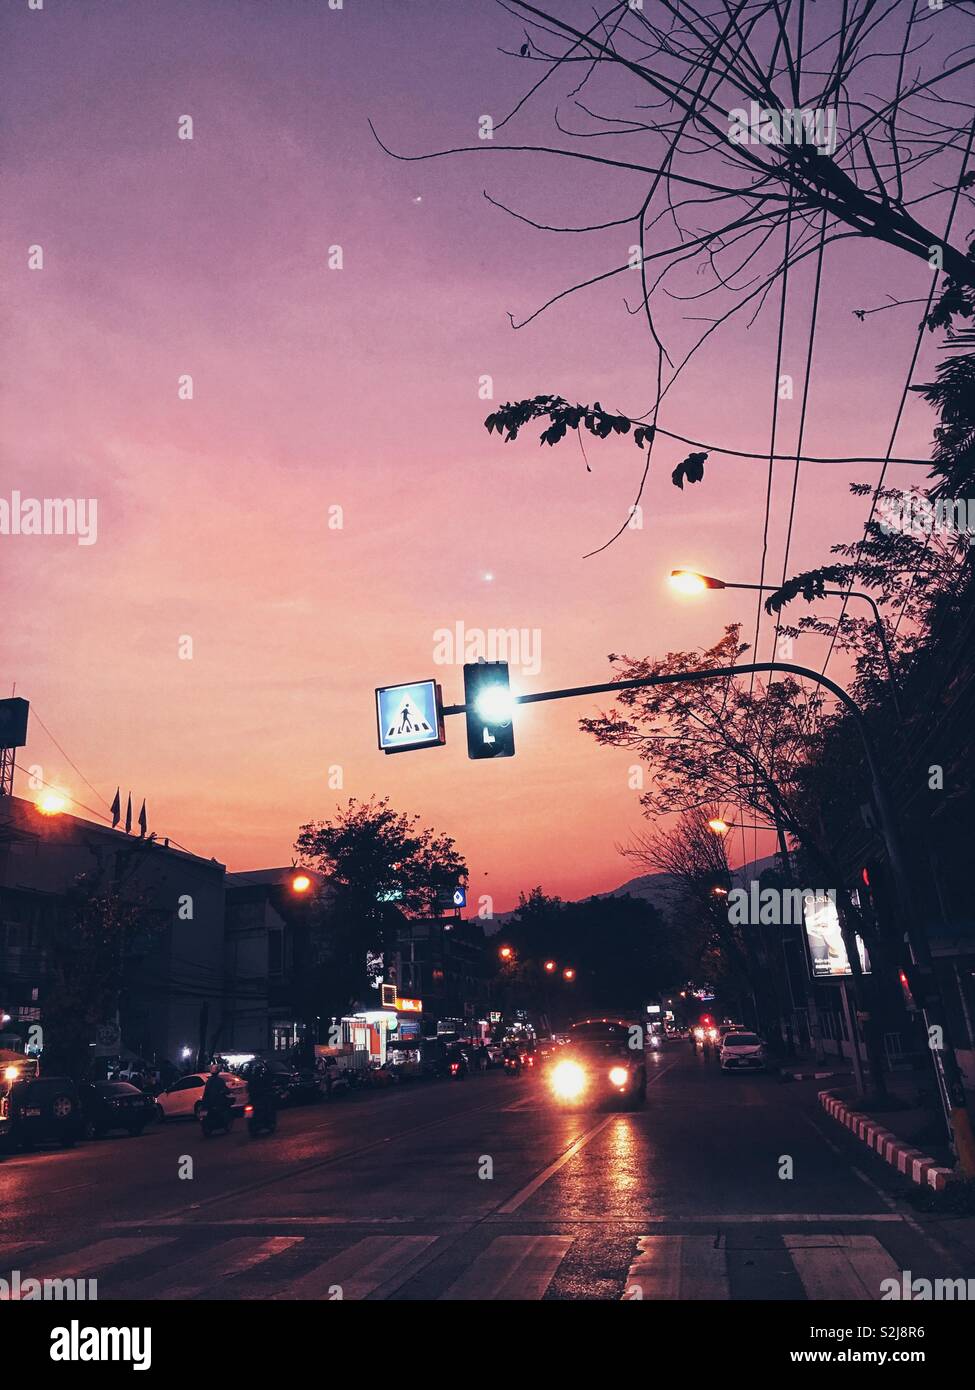 An peaceful evening in Chiang Mai, Thailand. This was taken on my way to visit old city. Love the color mixture of purple and orange of the sky and the traffic lighting. Stock Photo